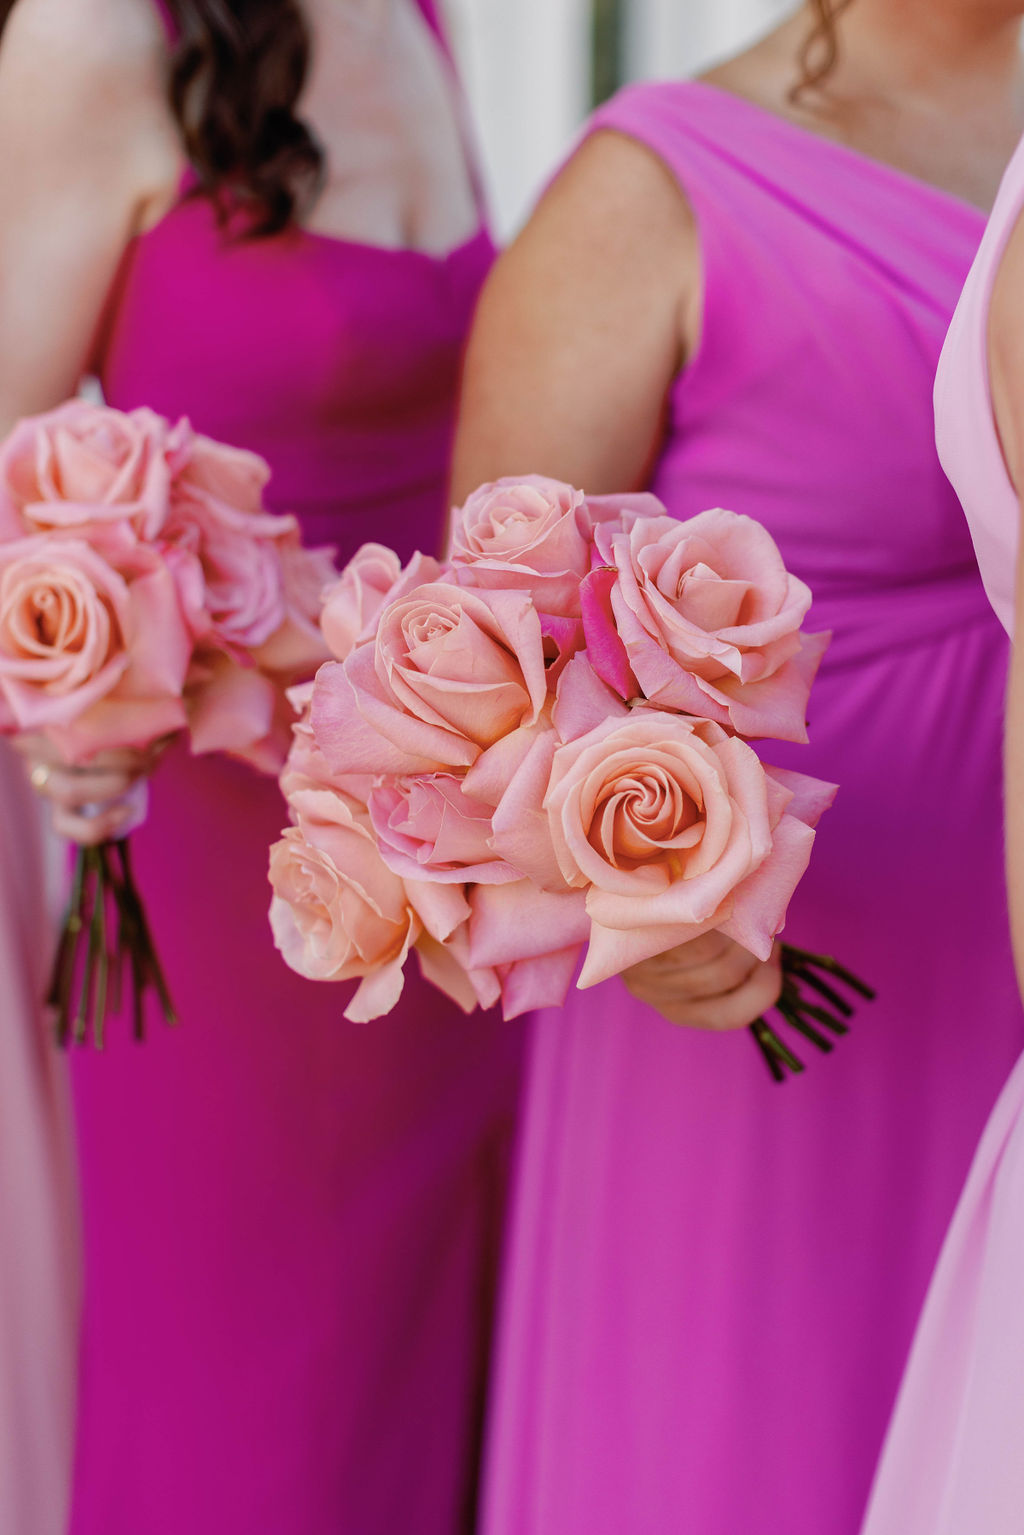 Torso photo of the bridesmaids dressed in Viva Magenta gowns and holding bouquets in mixed shades of pink by their side as they stand at The Grand Lady Wedding Venue in Austin Texas. |Photographer Sarah Block of Sarah Block Photography